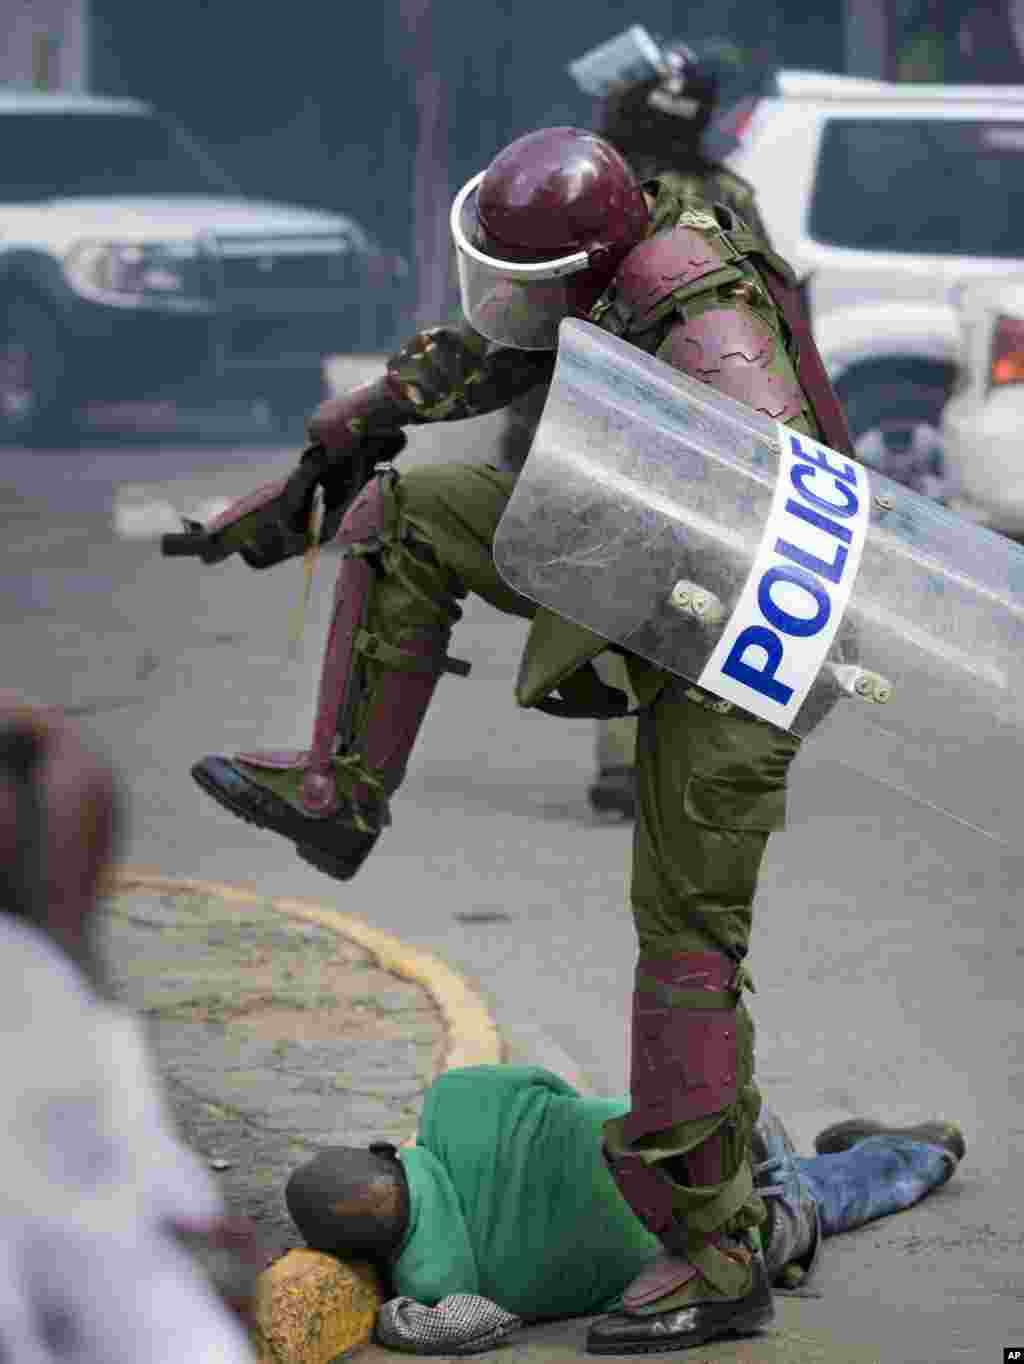 A Kenyan riot policeman repeatedly kicks a protester who tripped during a protest in downtown Nairobi. Police tear-gassed and beat opposition supporters during a demonstration to demand the disbandment of the electoral authority over alleged bias and corruption.